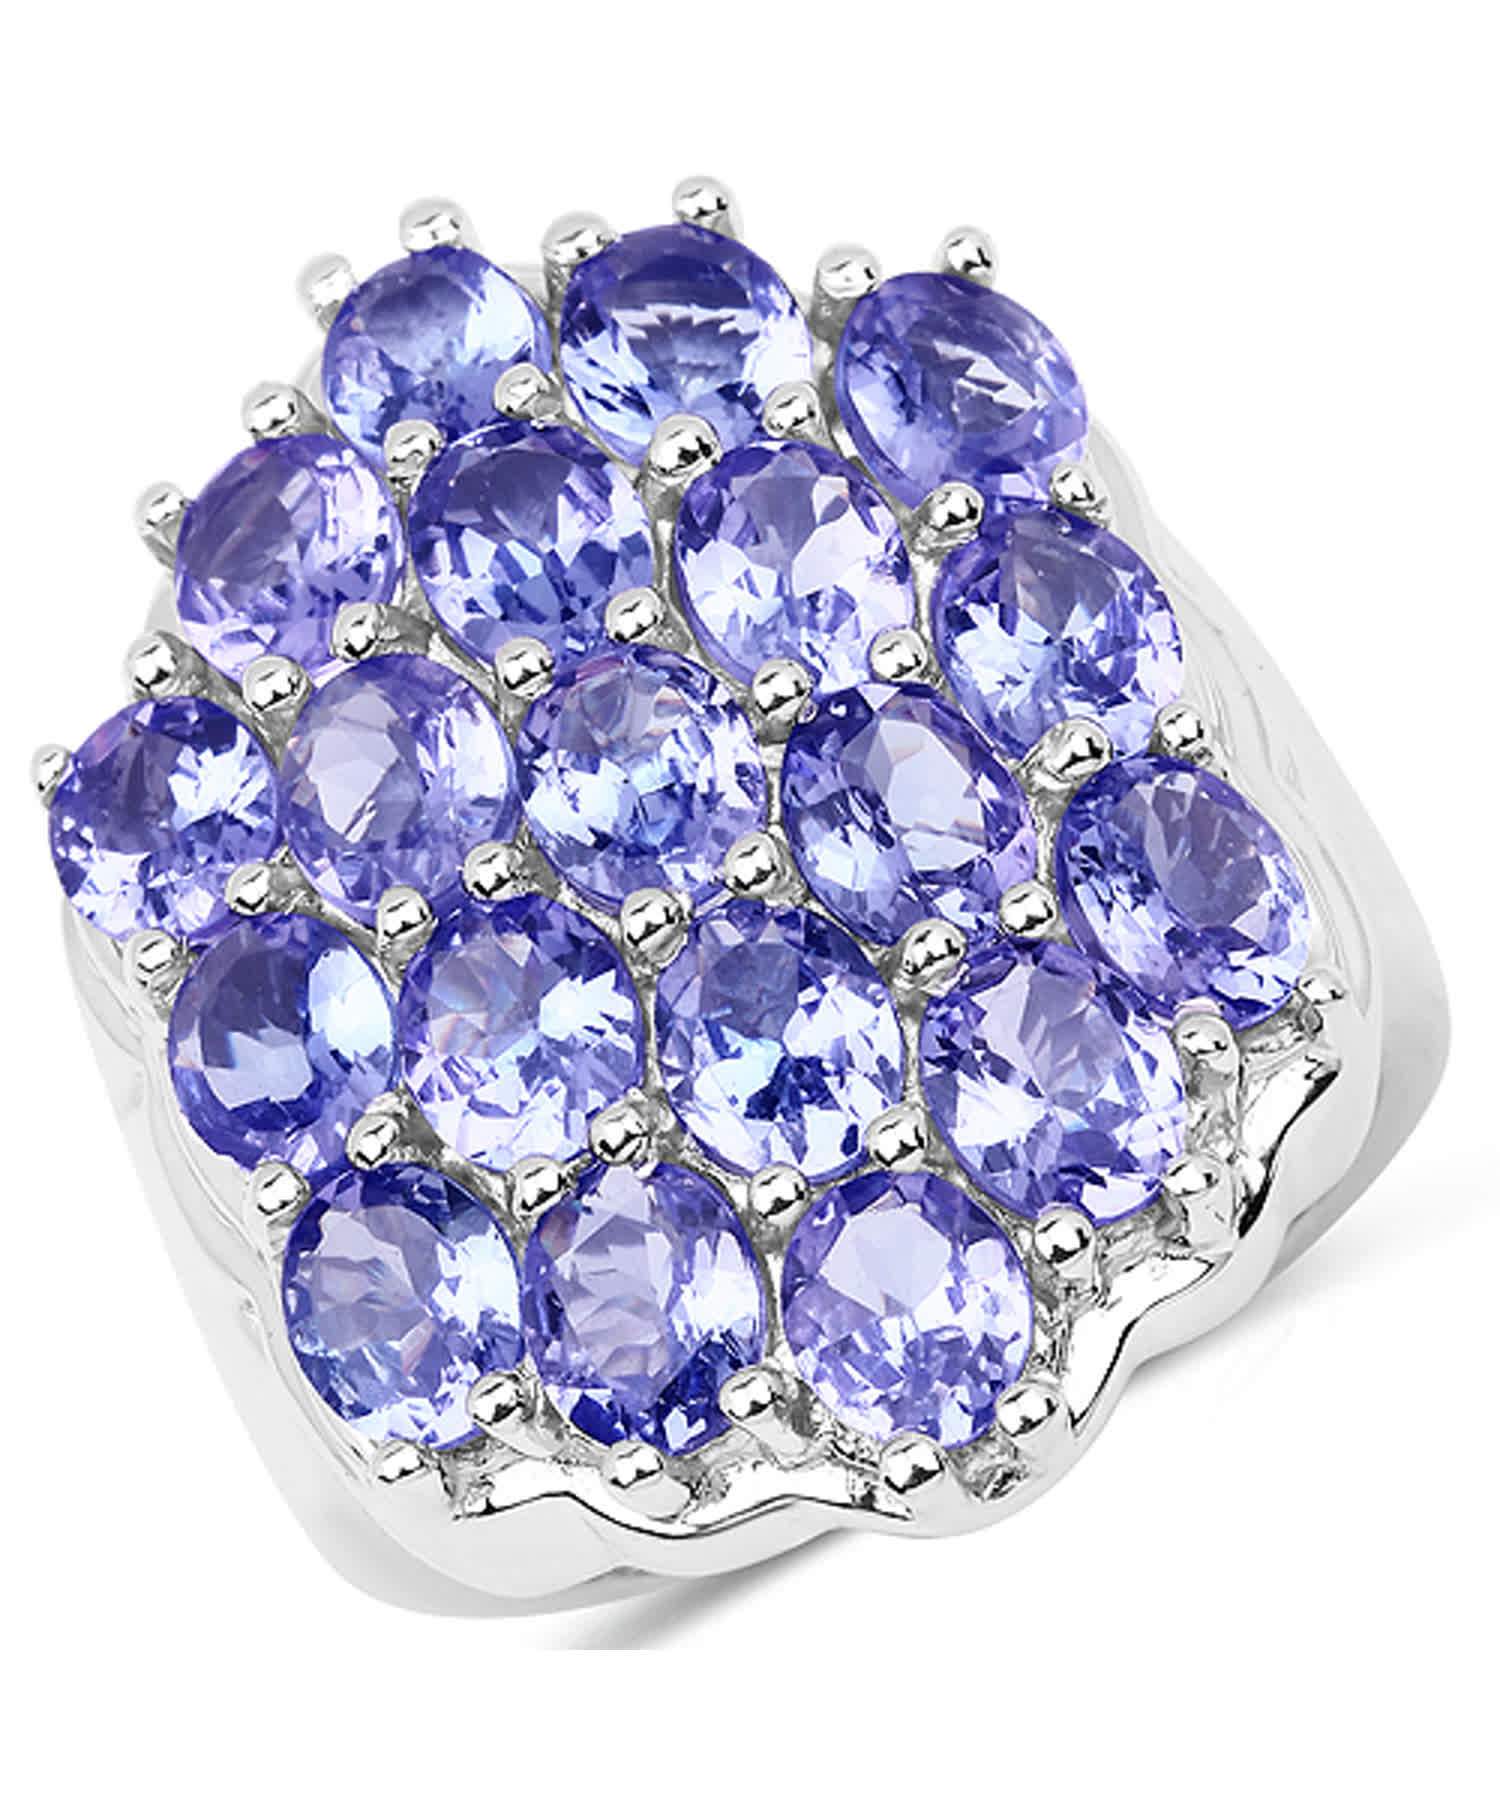 6.27ctw Natural Tanzanite Rhodium Plated 925 Sterling Silver Cocktail Ring View 1